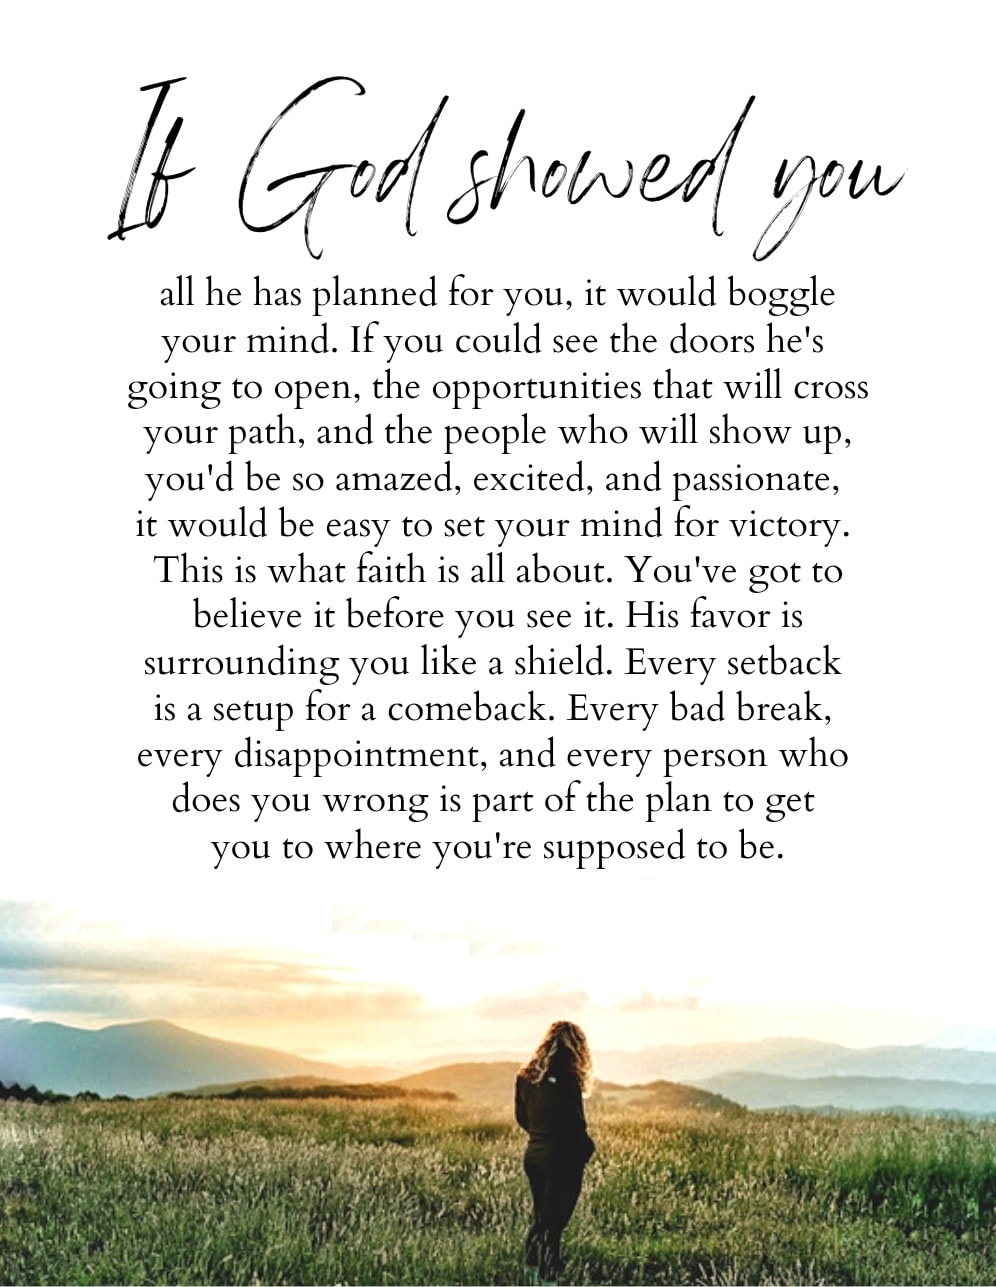 If God Showed you all he has planned for you